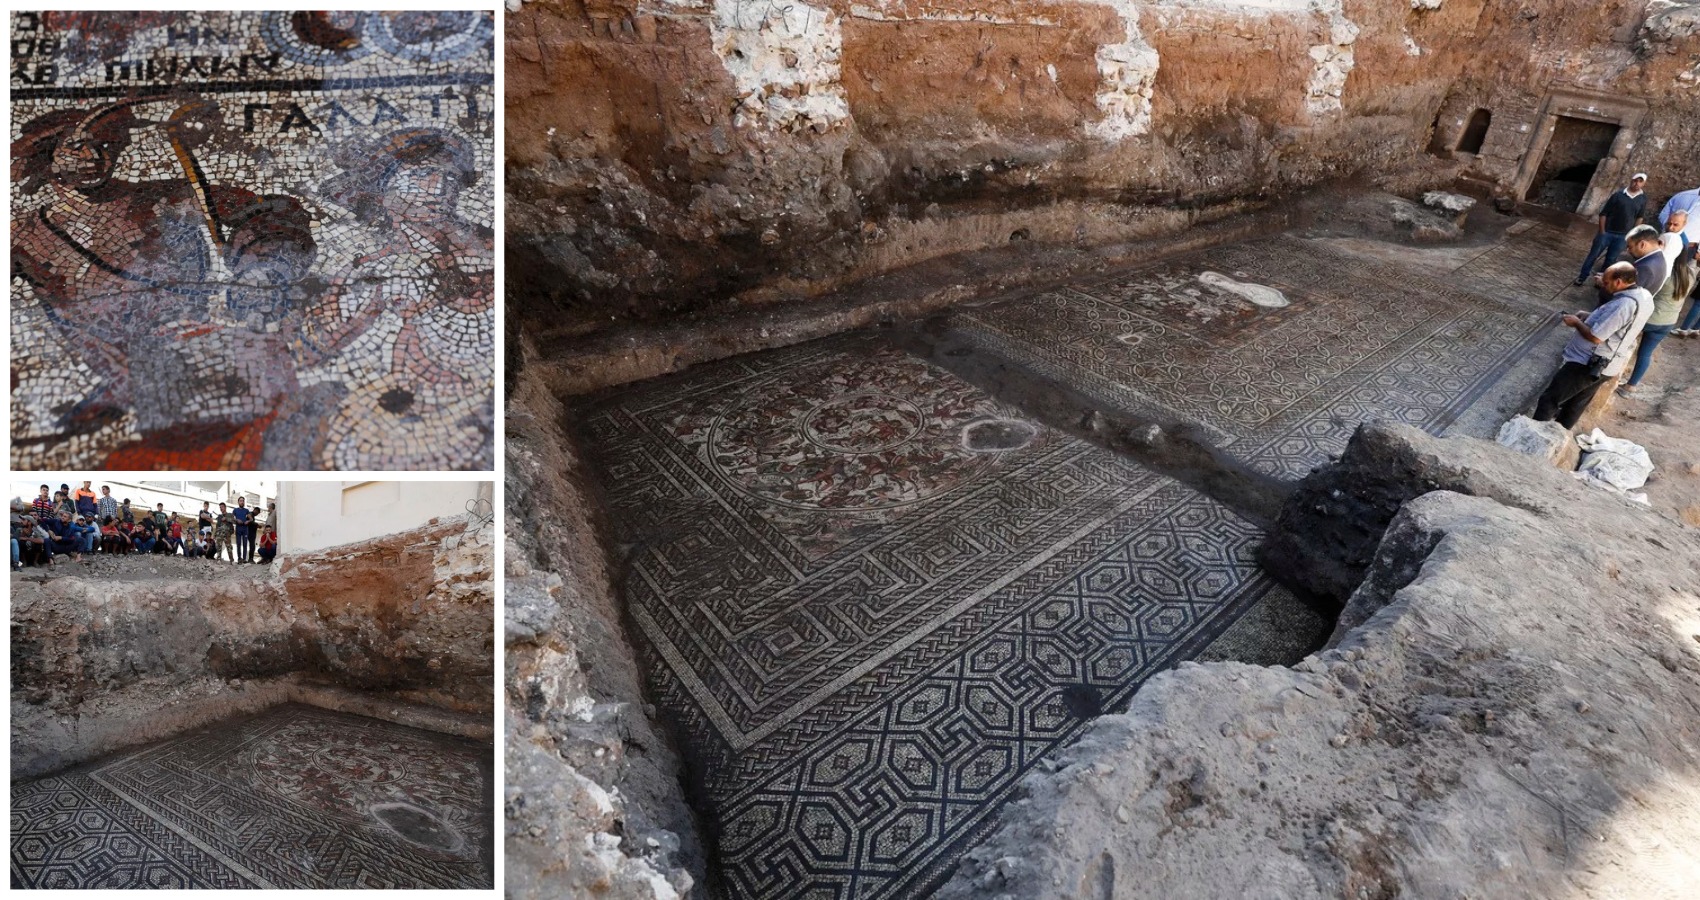 A rare Roman-era mosaic is uncovered during the excavation of an old building in Syria